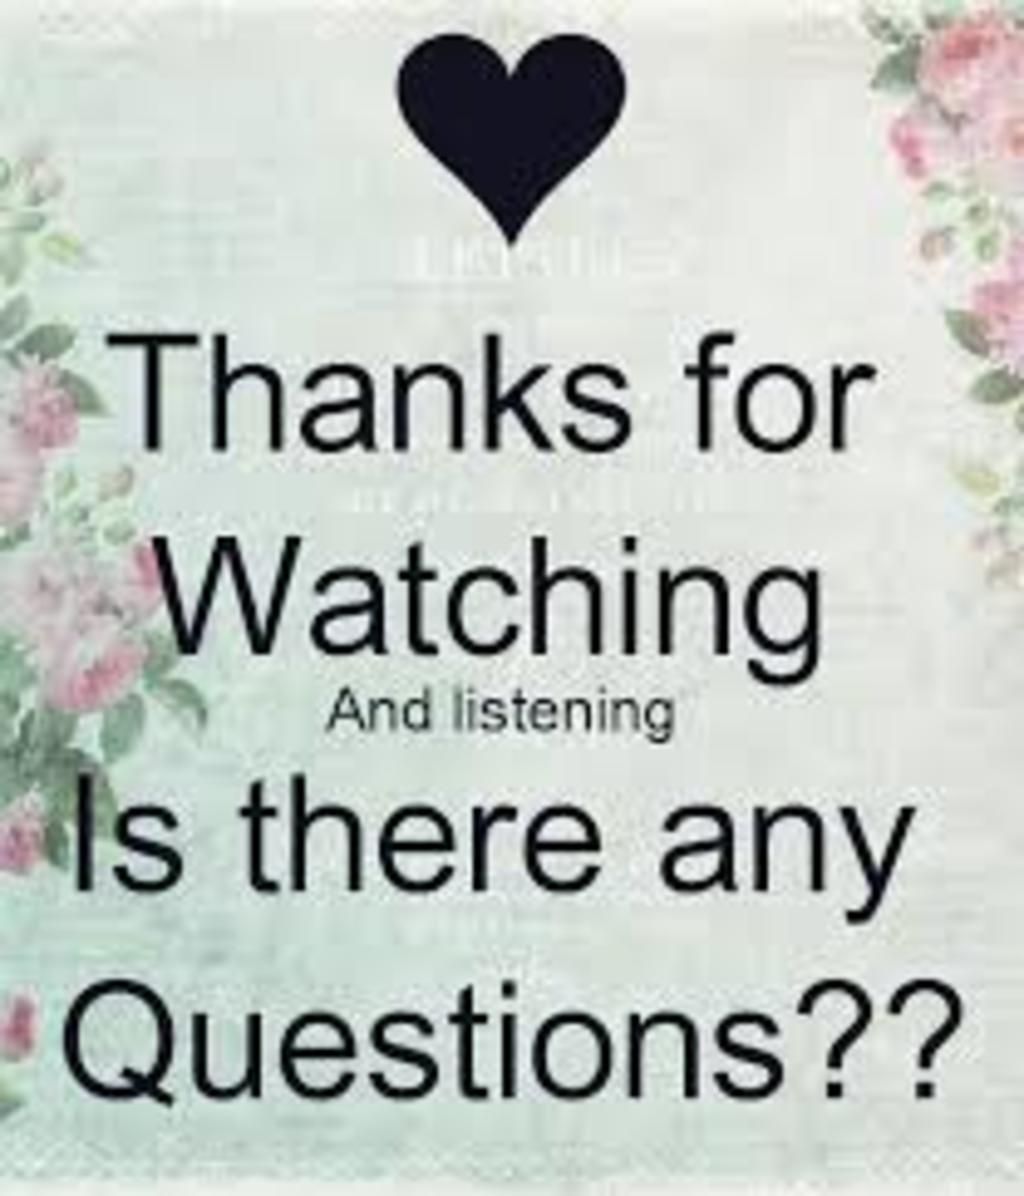 Thanks for Watching And listening Is there any Questions??